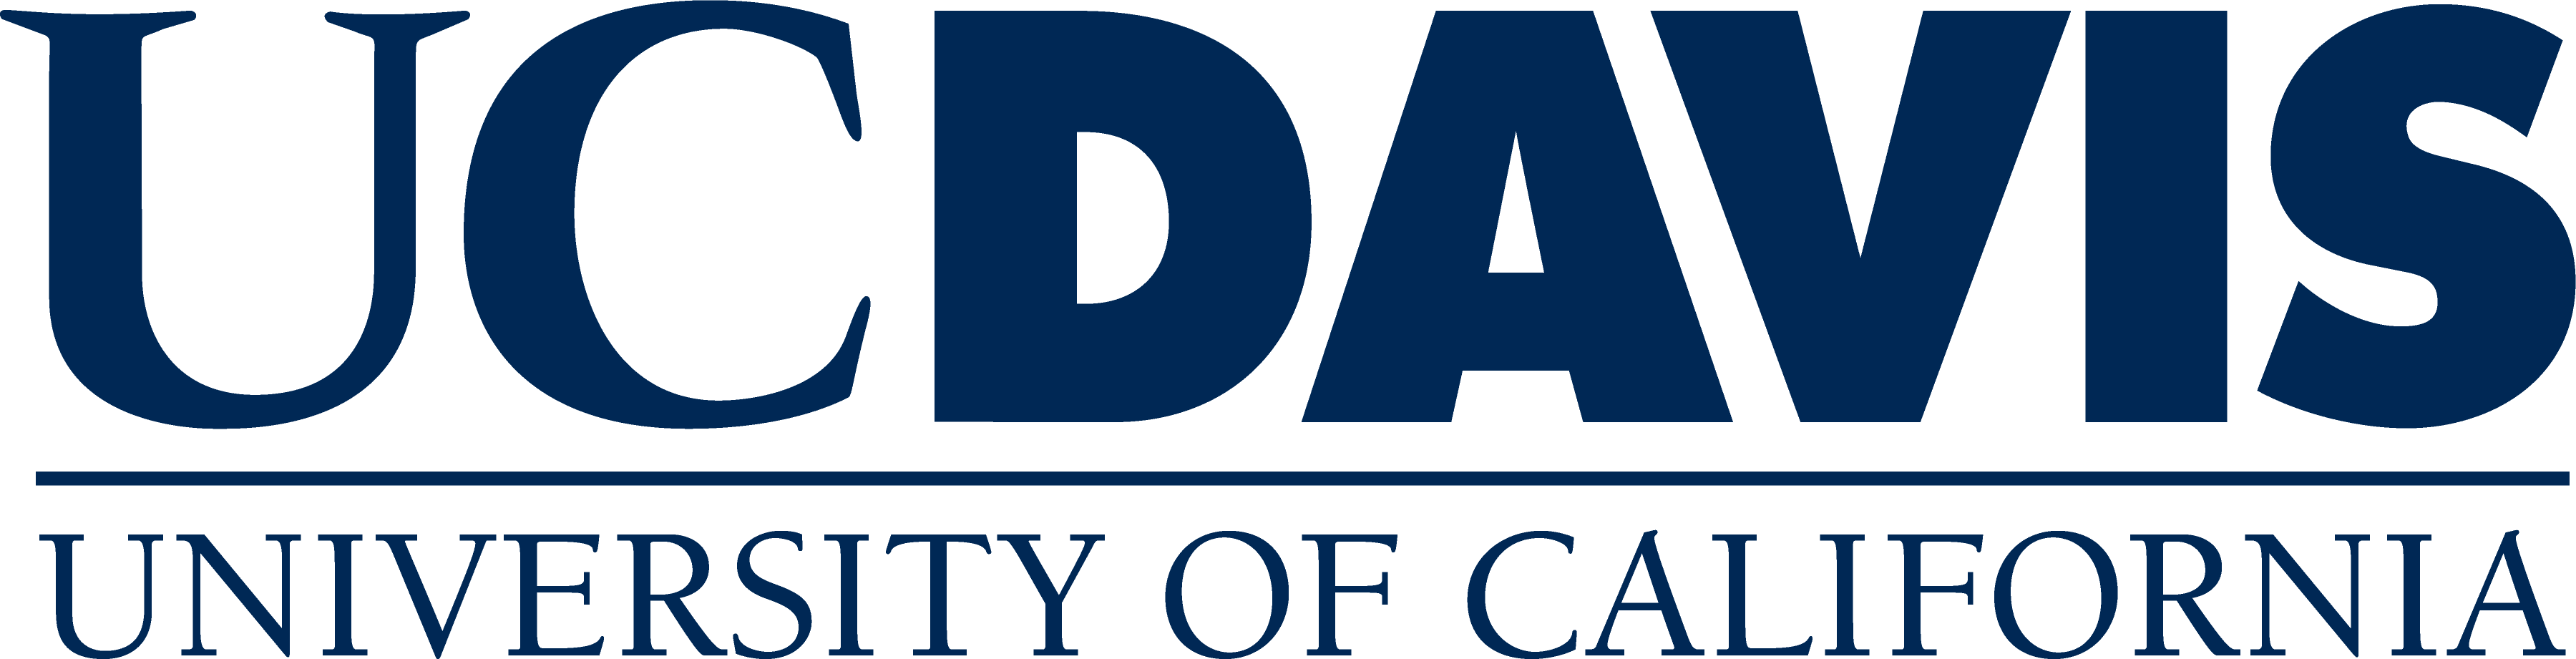 UC Davis Seeks Assistant Professor of Dairy Nutrition and Management